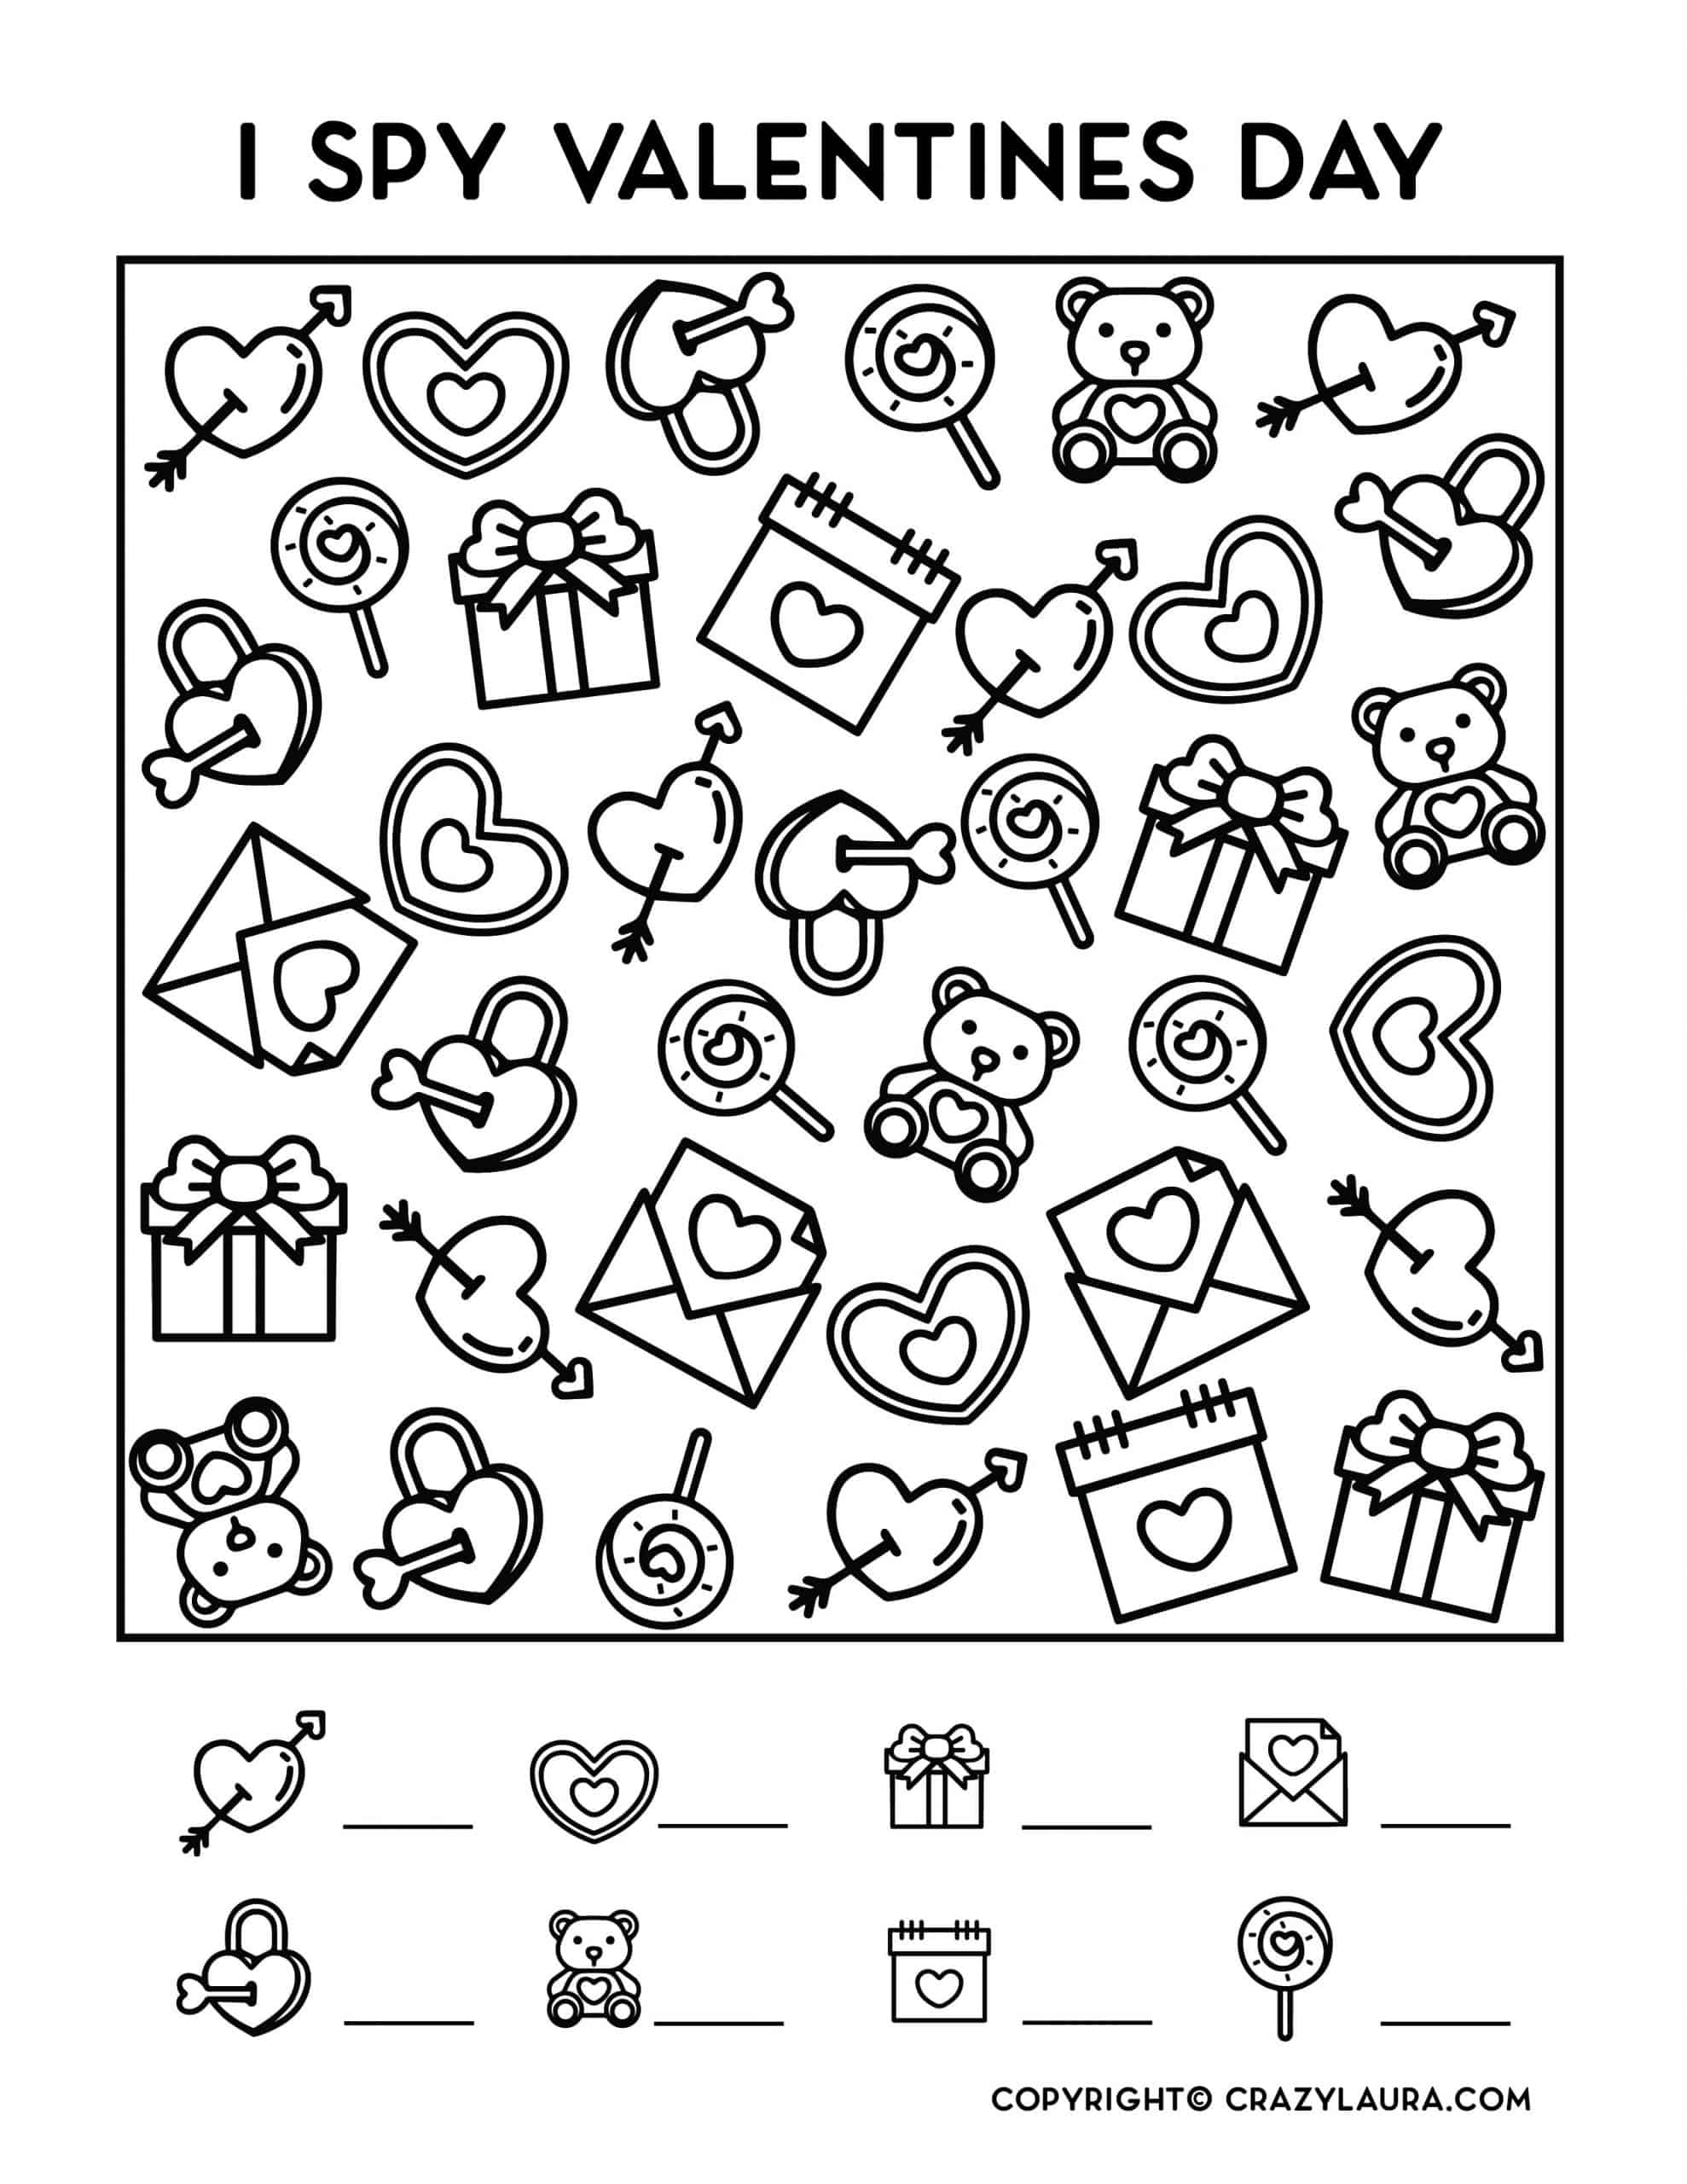 i spy valentines day printable for young kids